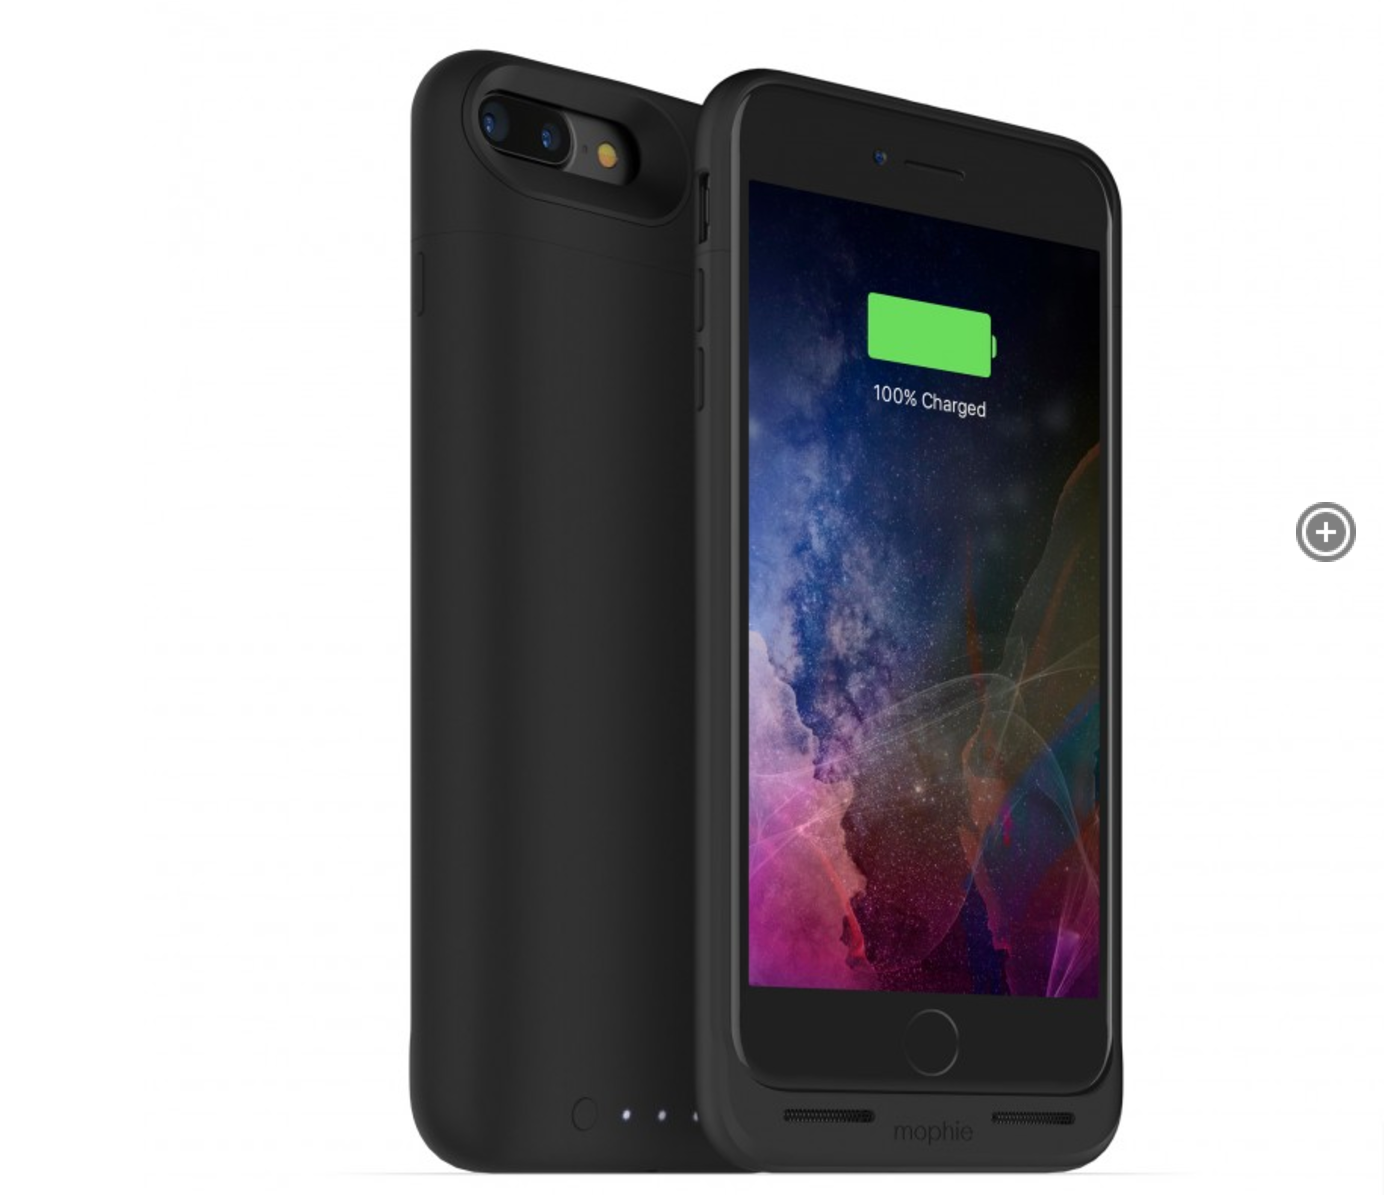 Mophie's Juice Park air is a smart battery case that also can work with wireless charging, and sells for $99.95